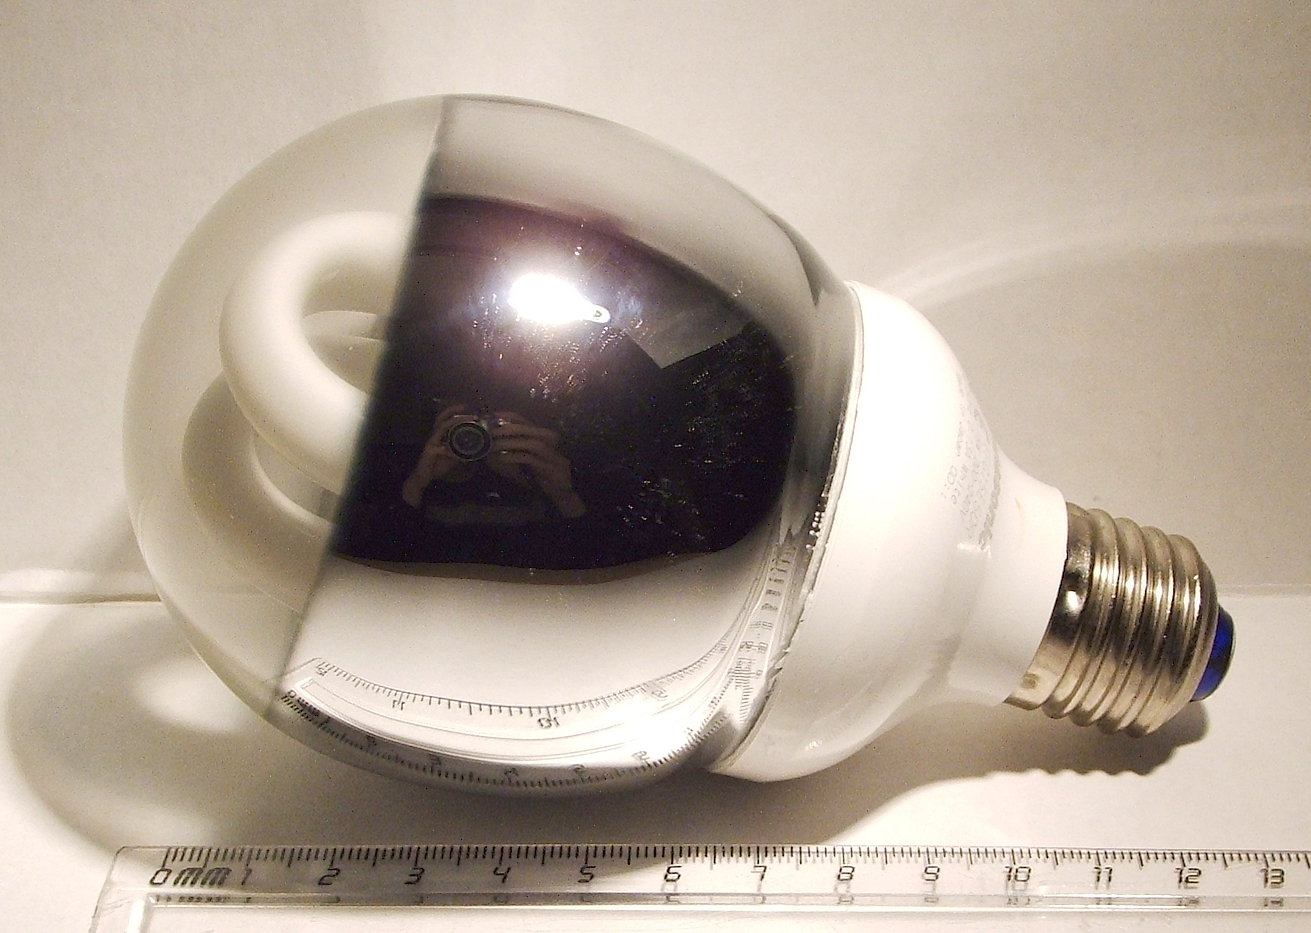 Panasonic EFG15E50R Reflector Compact Fluorescent Lamp - Shown adjacent to ruler to show size